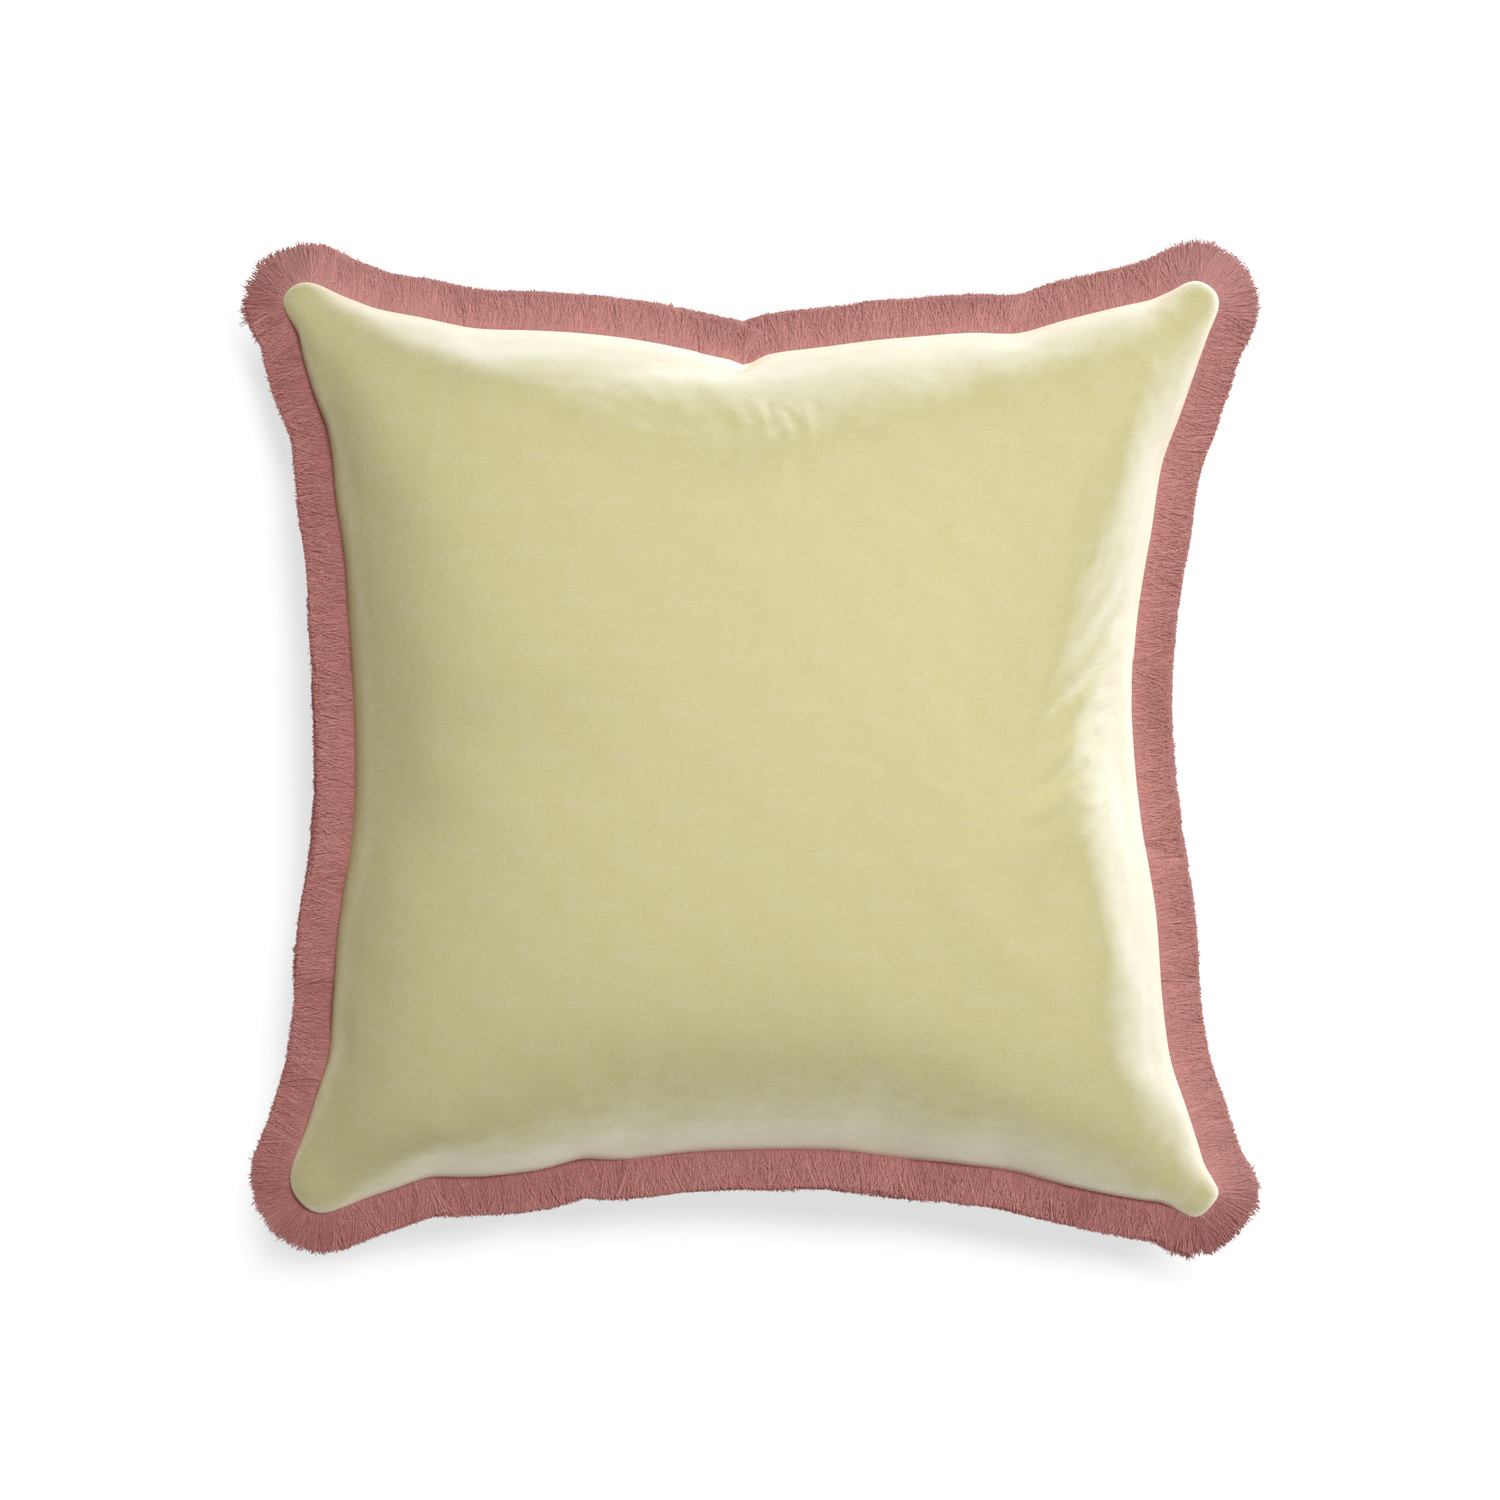 square light green pillow with dusty rose pink fringe